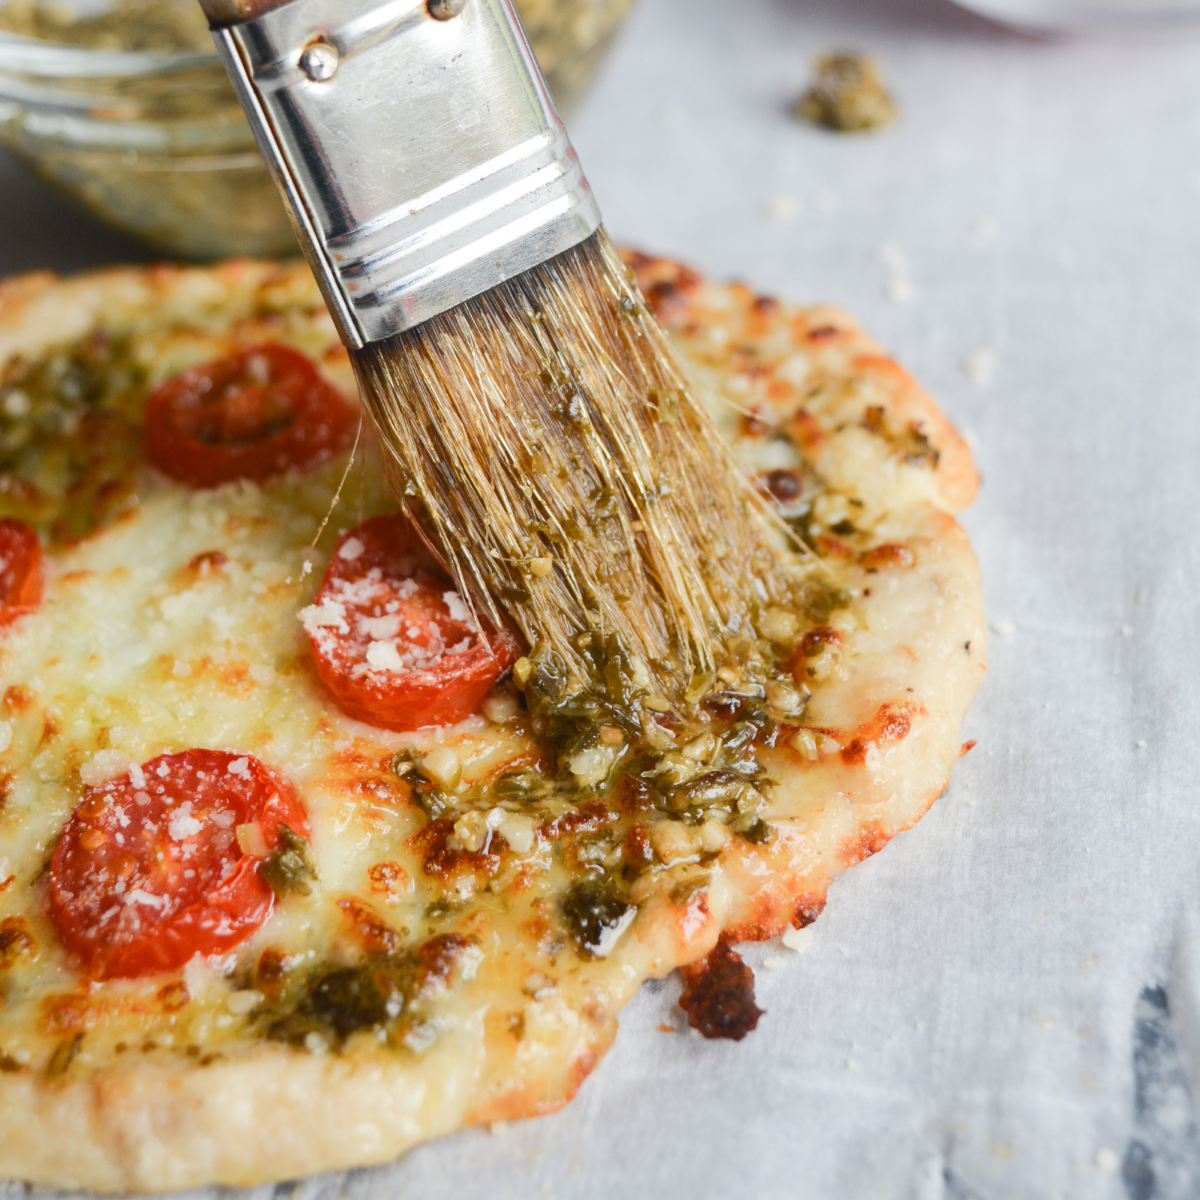 Chicken crust pizza being brushed with basil pesto